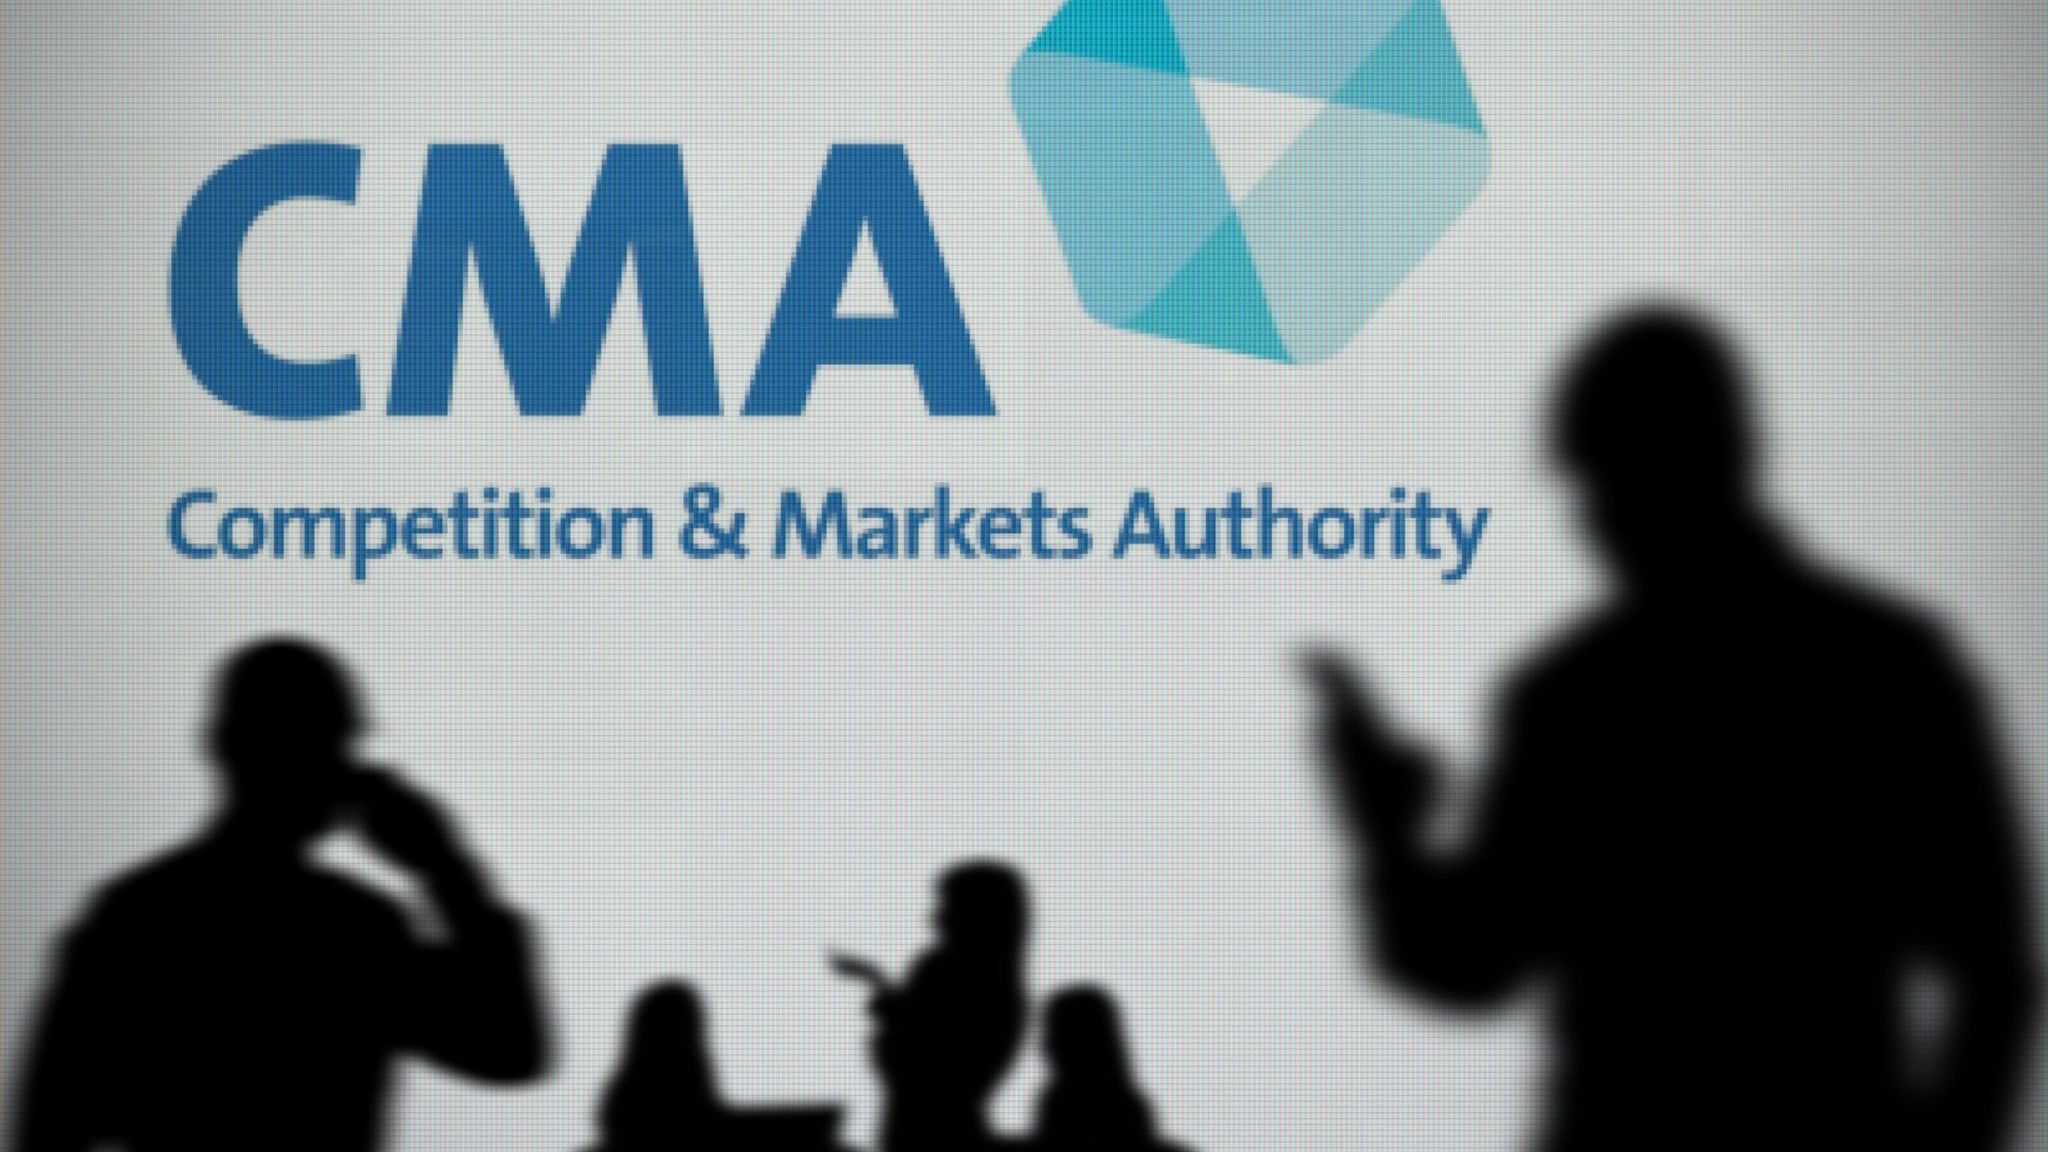 CMA (Competition & Markets Authority)